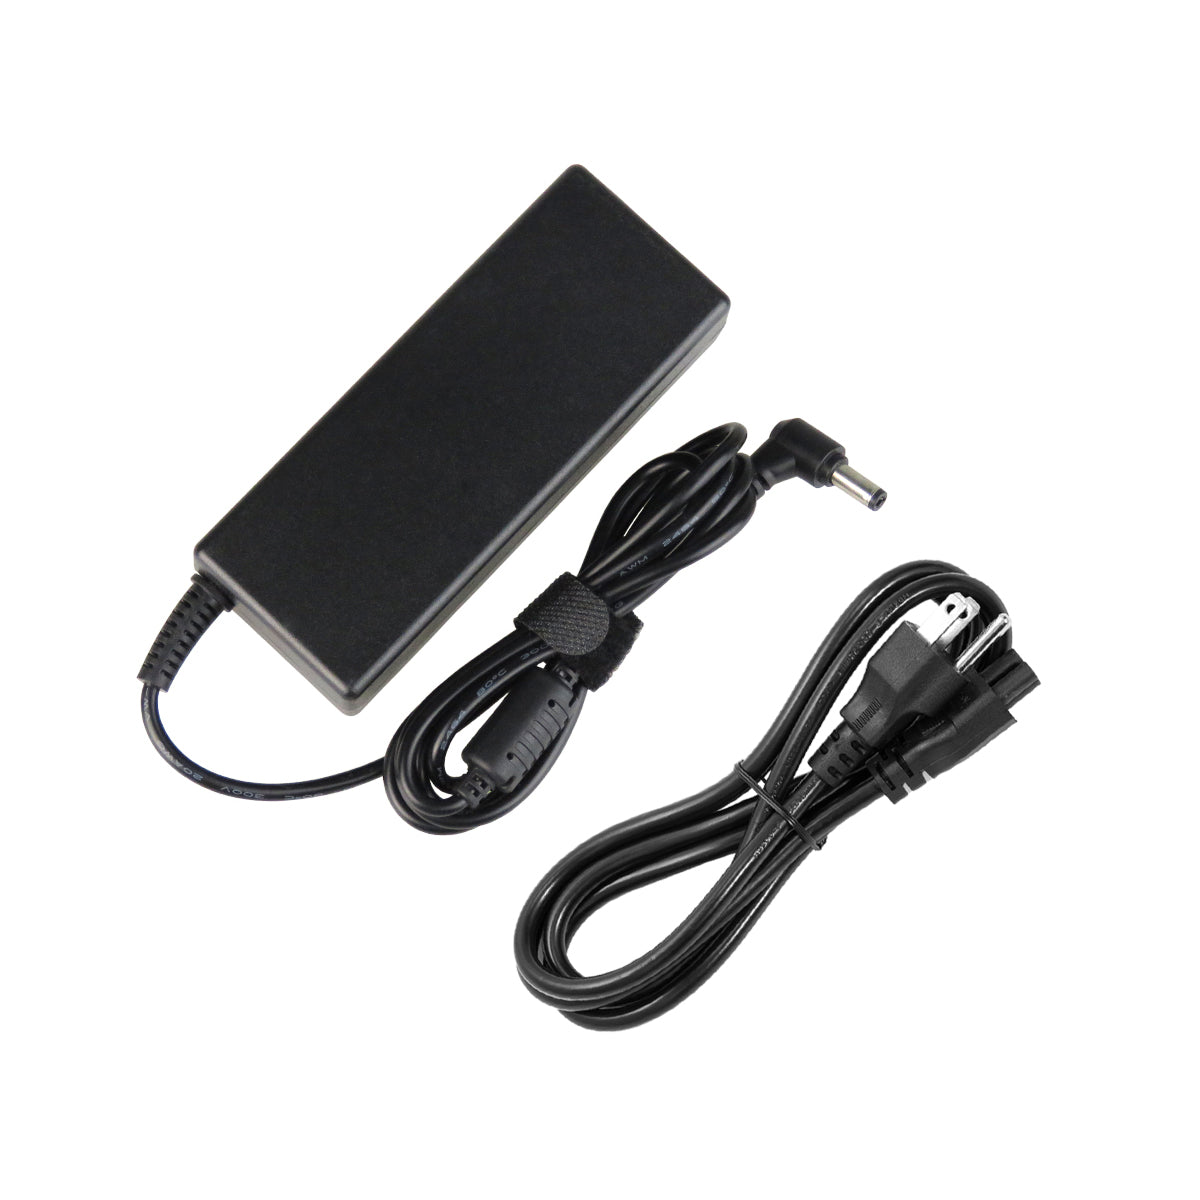 AC Adapter Charger for ASUS A8He Notebook.